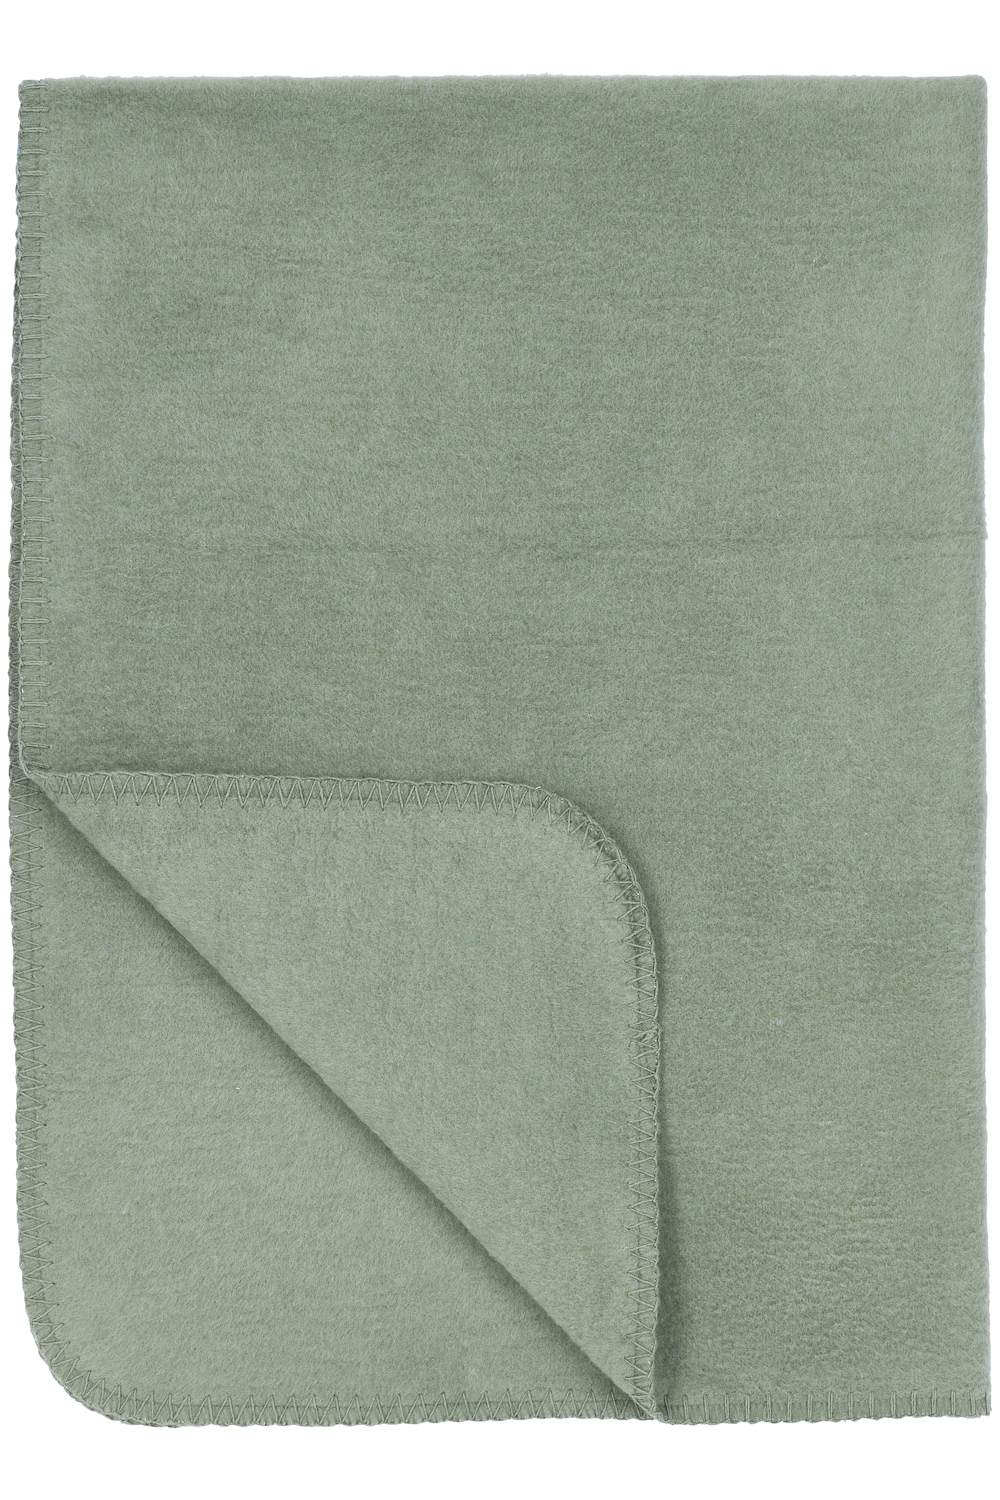 Cot Bed Blanket Uni - Forest Green - 100x150cm